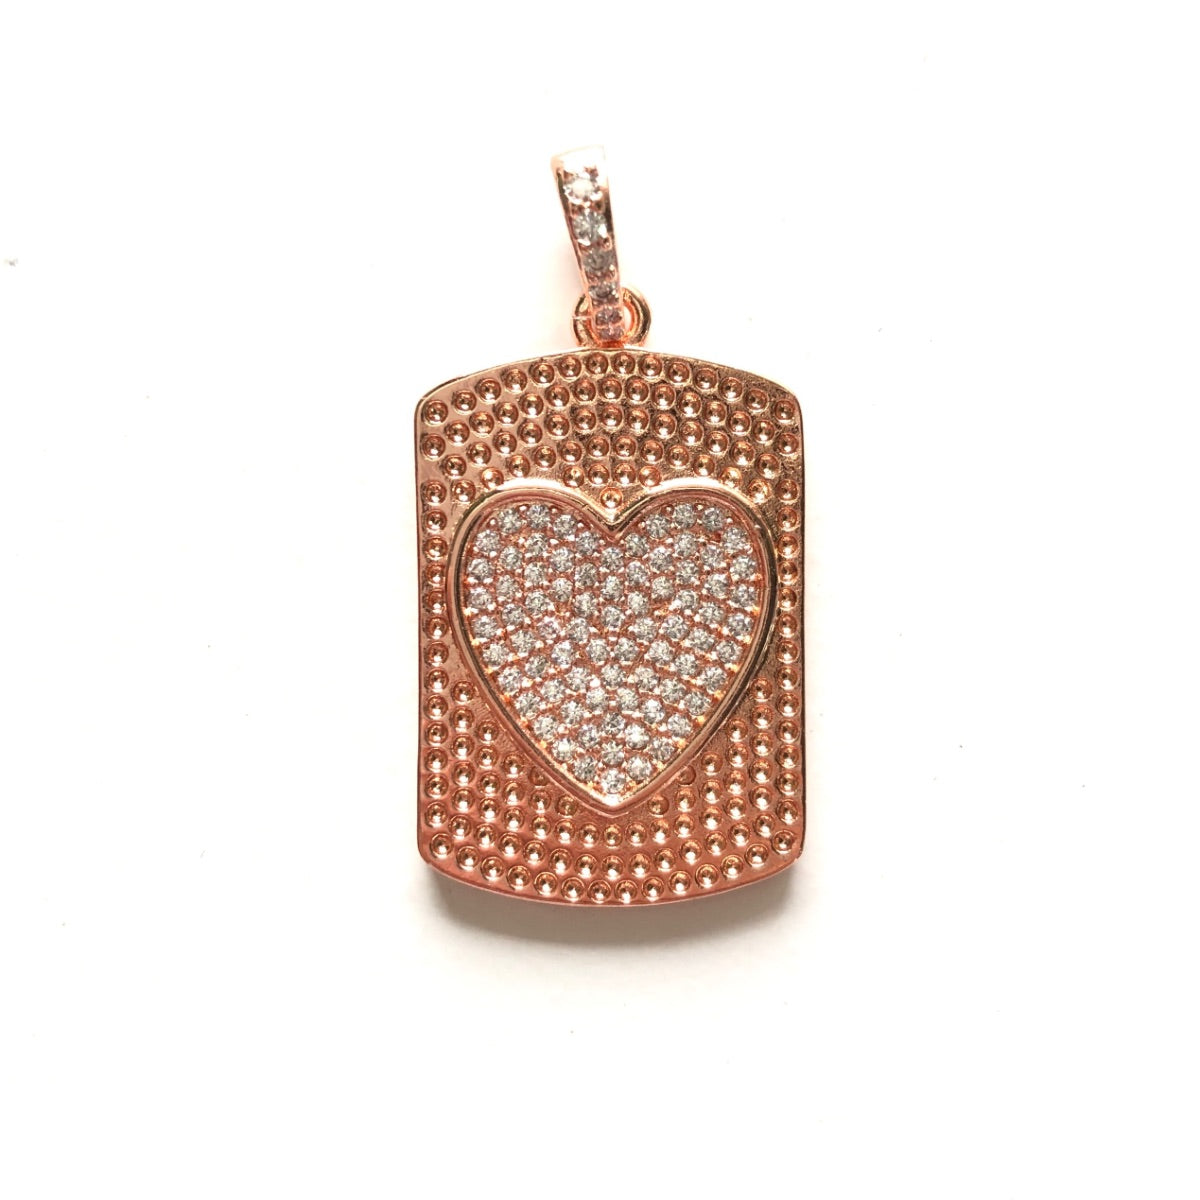 10pcs/lot 37*19mm CZ Pave Heart Rectangle Plate Charm Pendants Rose Gold CZ Paved Charms Hearts On Sale Charms Beads Beyond